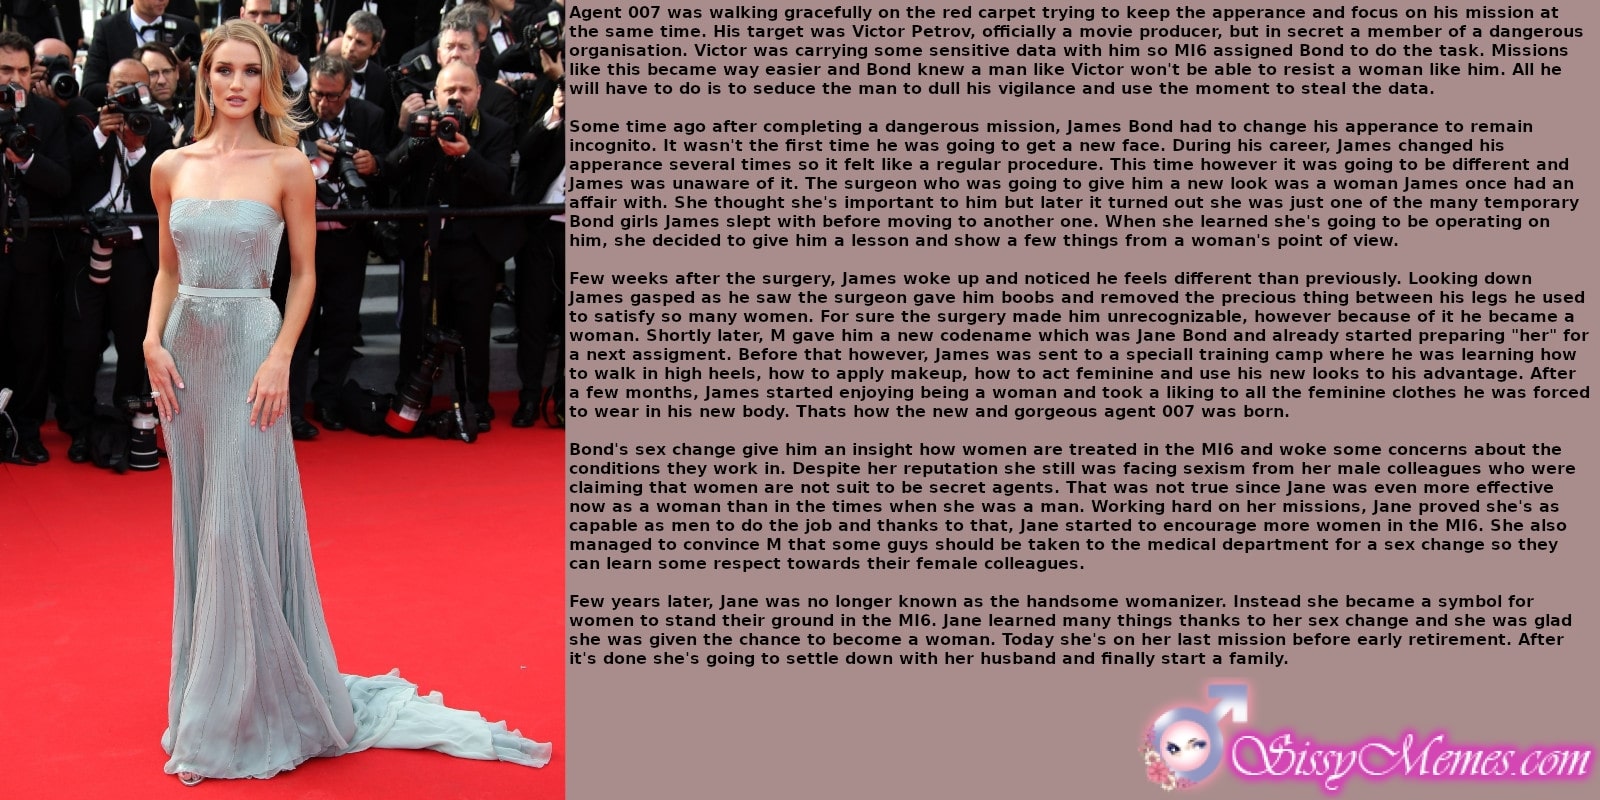 Femboy hotwife caption: Agent 007 was walking gracefully on the red carpet trying to keep the apperance and focus on his mission at the same time. His target was Victor Petrov, officially a movie producer, but in secret a member of a dangerous...